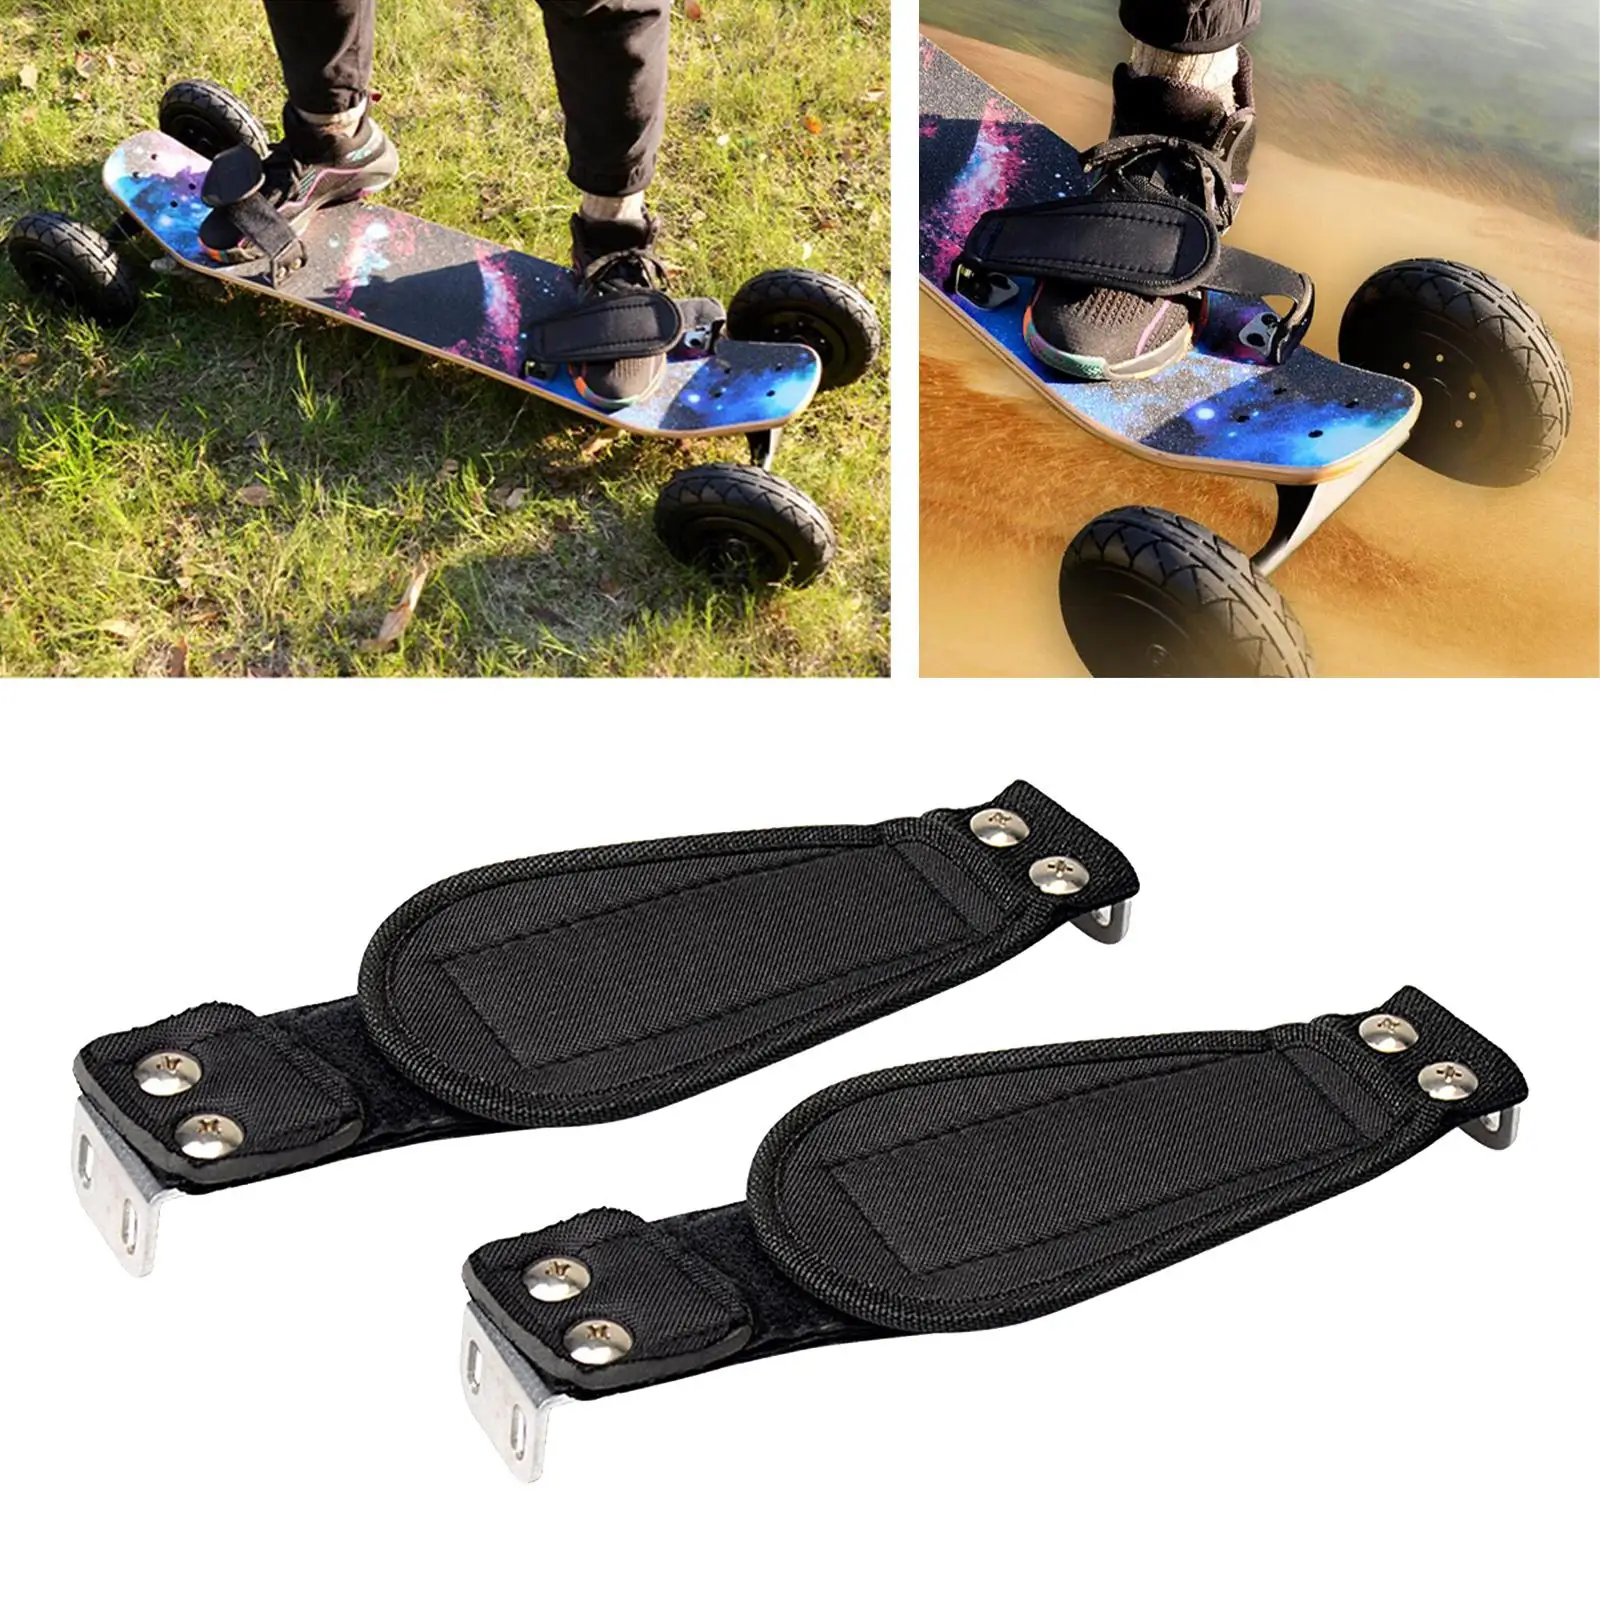 Foot Binding Device  Foot Holder  Foot Fixing Band Skate Board Stand Feet Holding Strap Keep Rider Standing Accessories